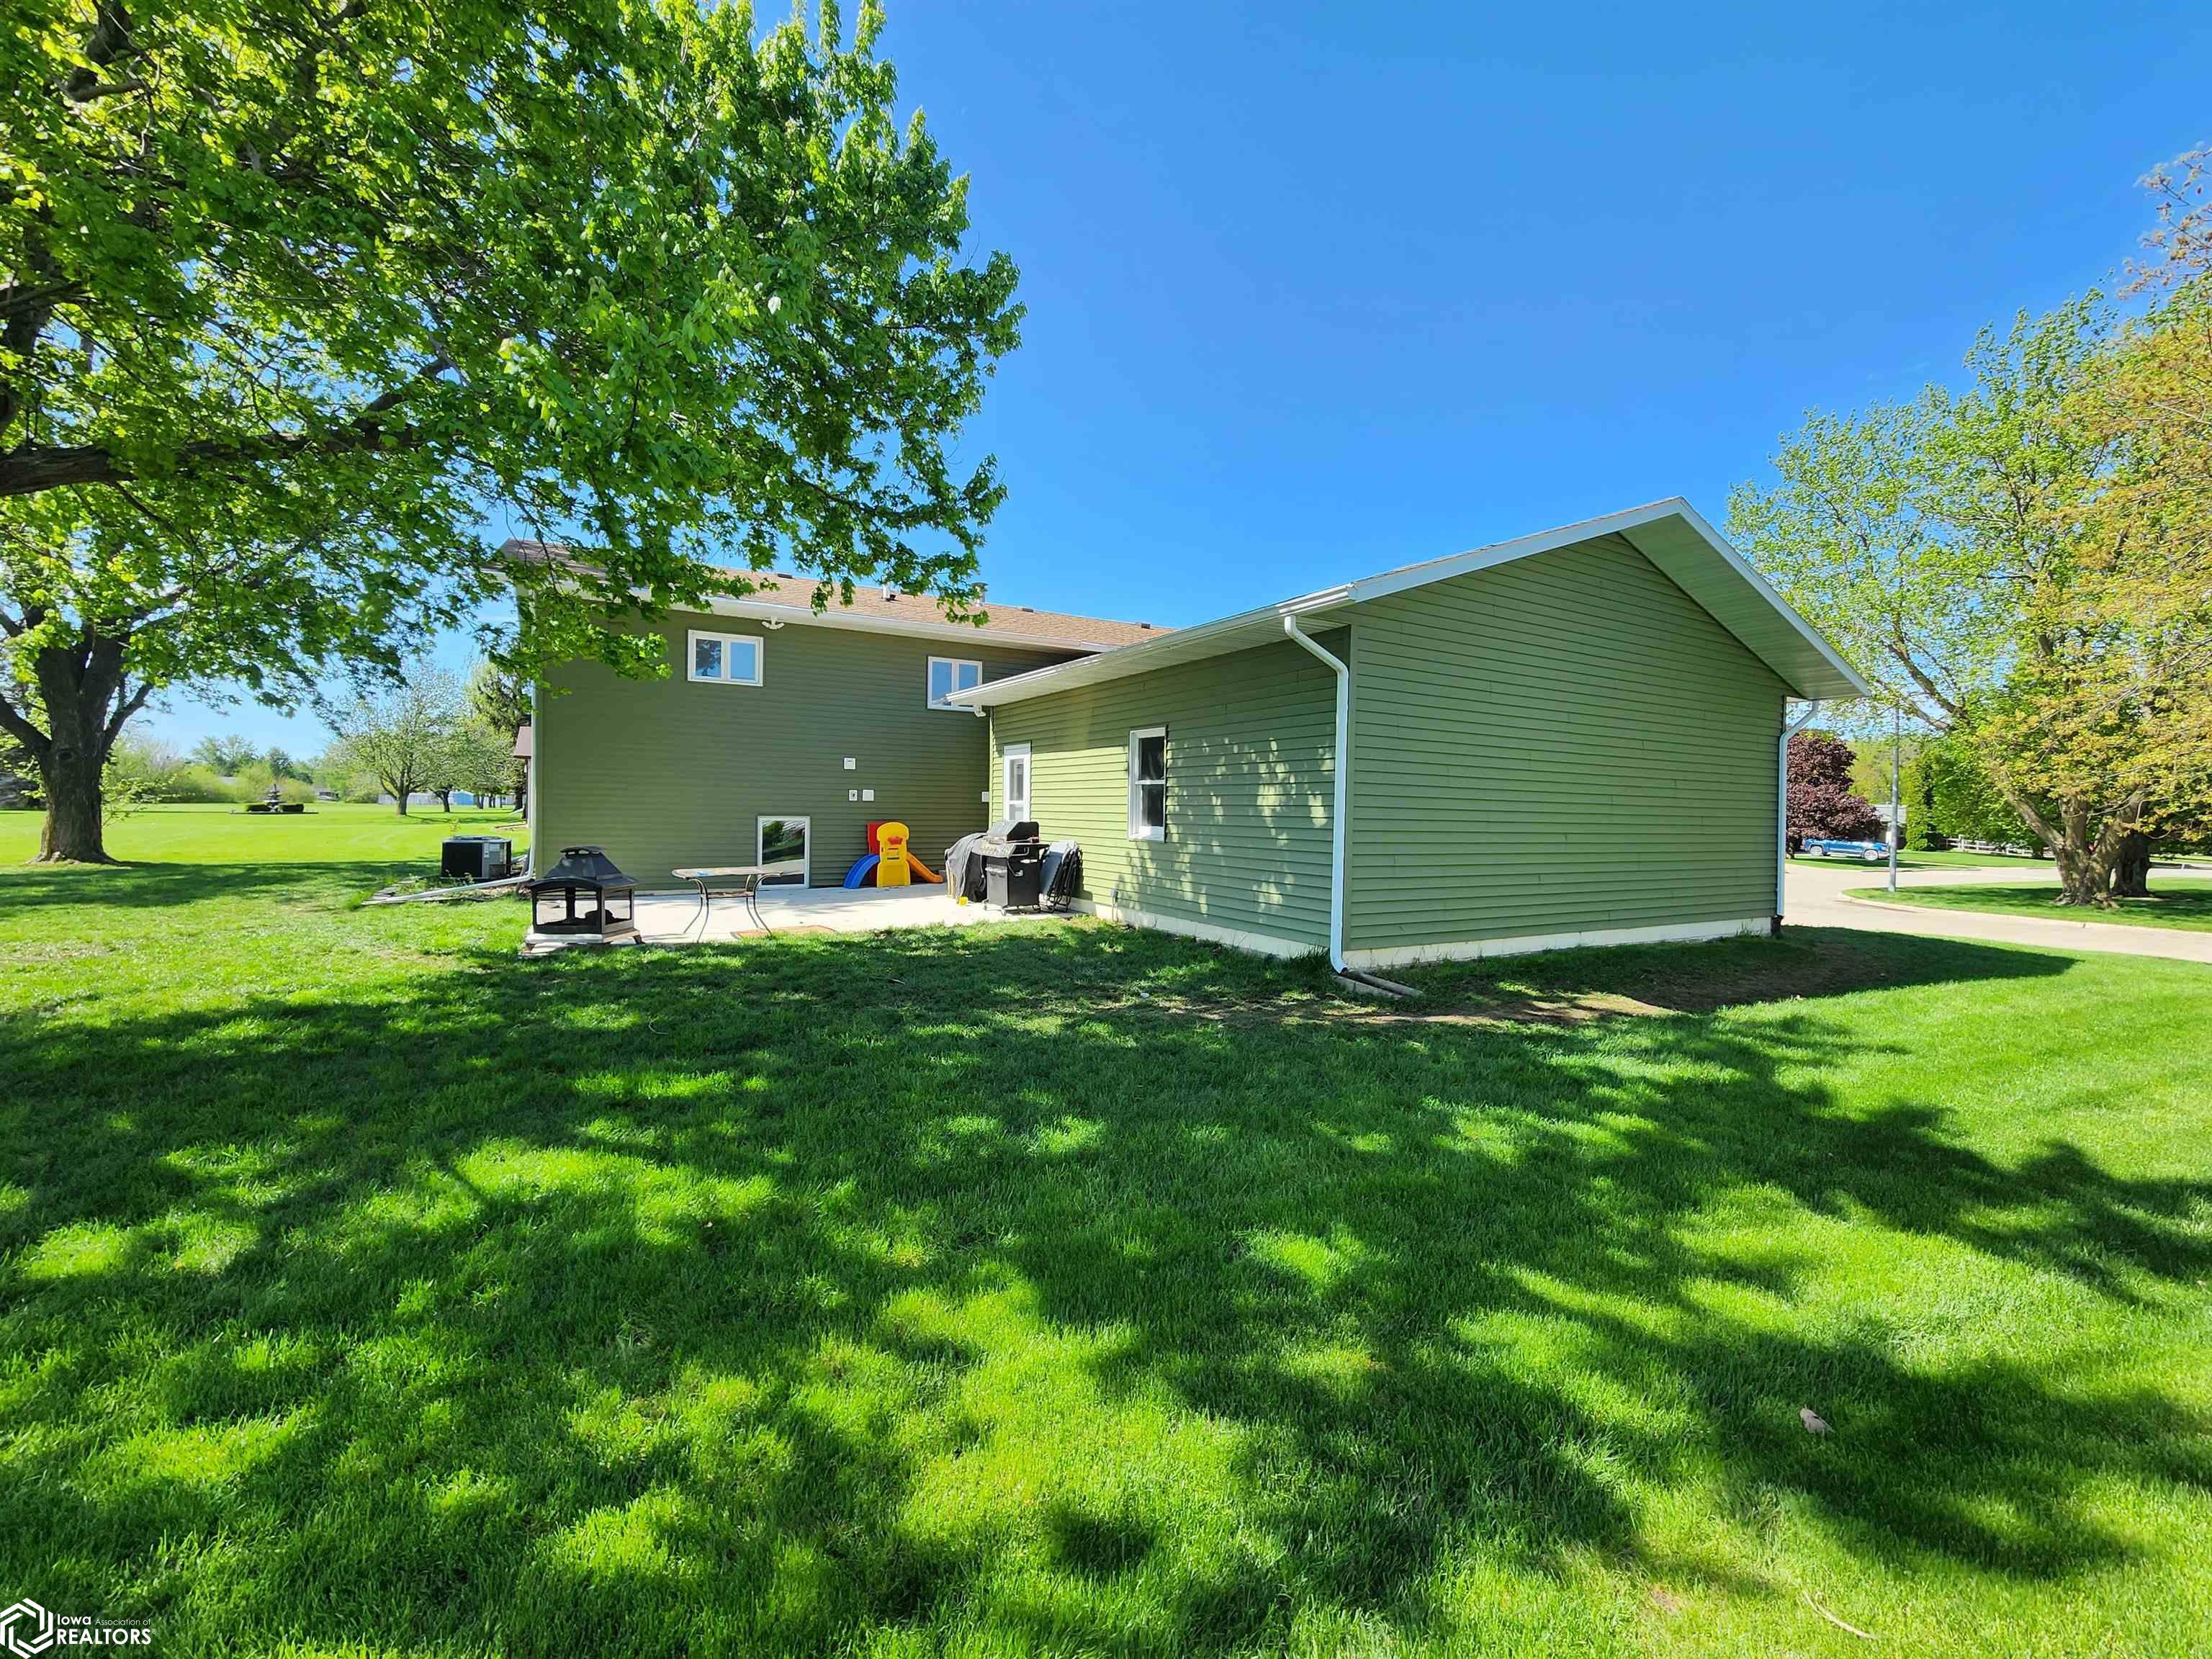 1501 Mulberry, Creston, Iowa 50801, 3 Bedrooms Bedrooms, ,1 BathroomBathrooms,Single Family,For Sale,Mulberry,6317001